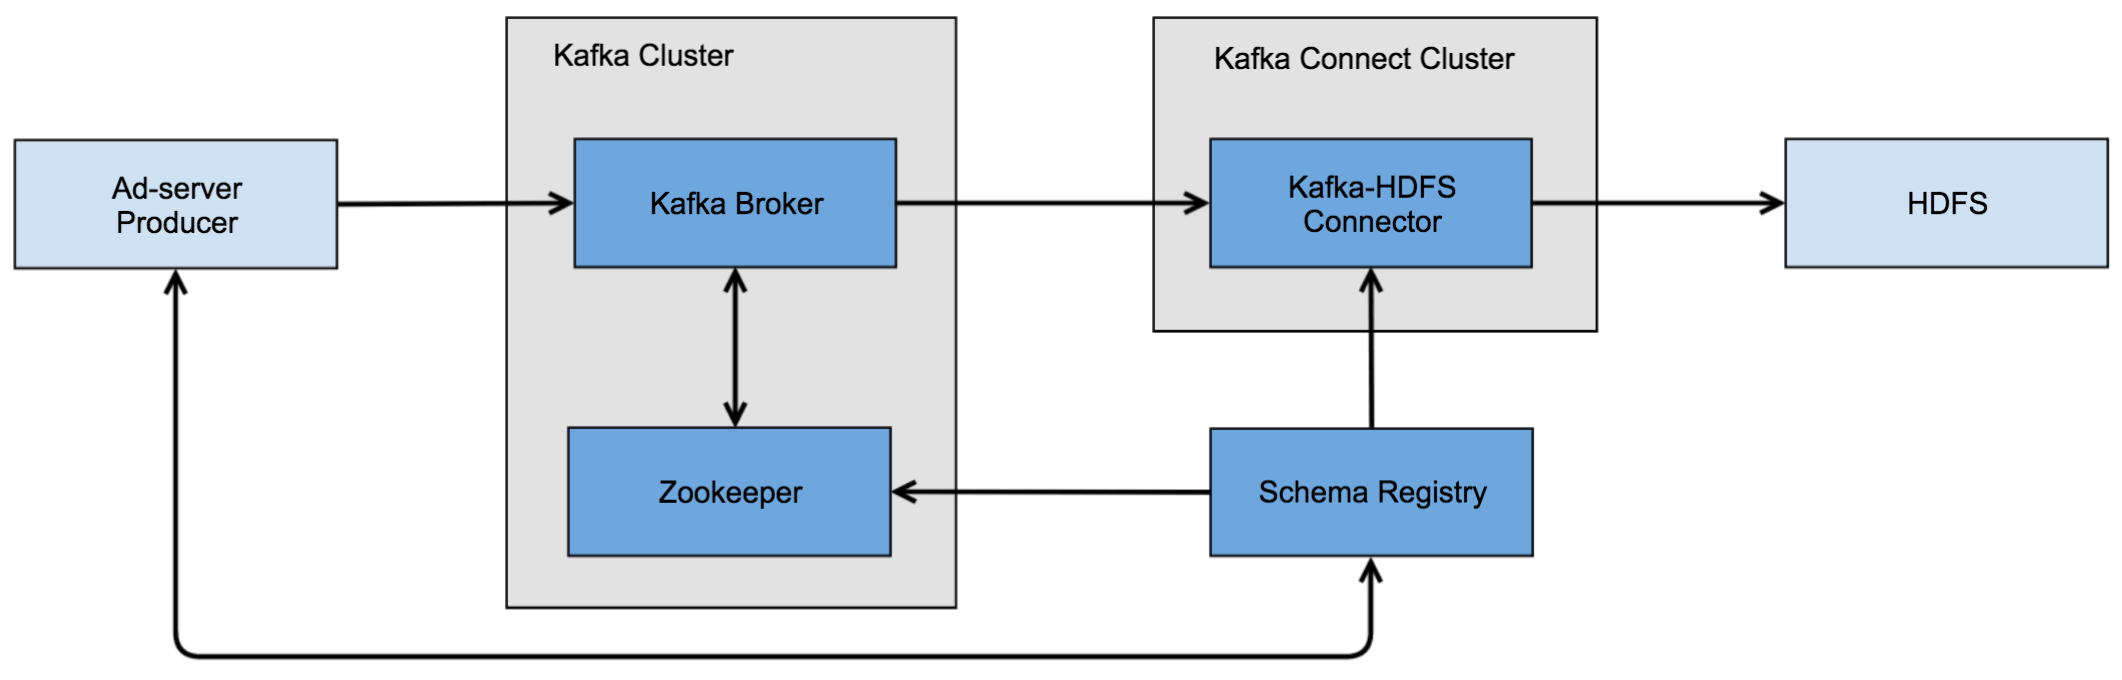 Ad-server Pipeline Components